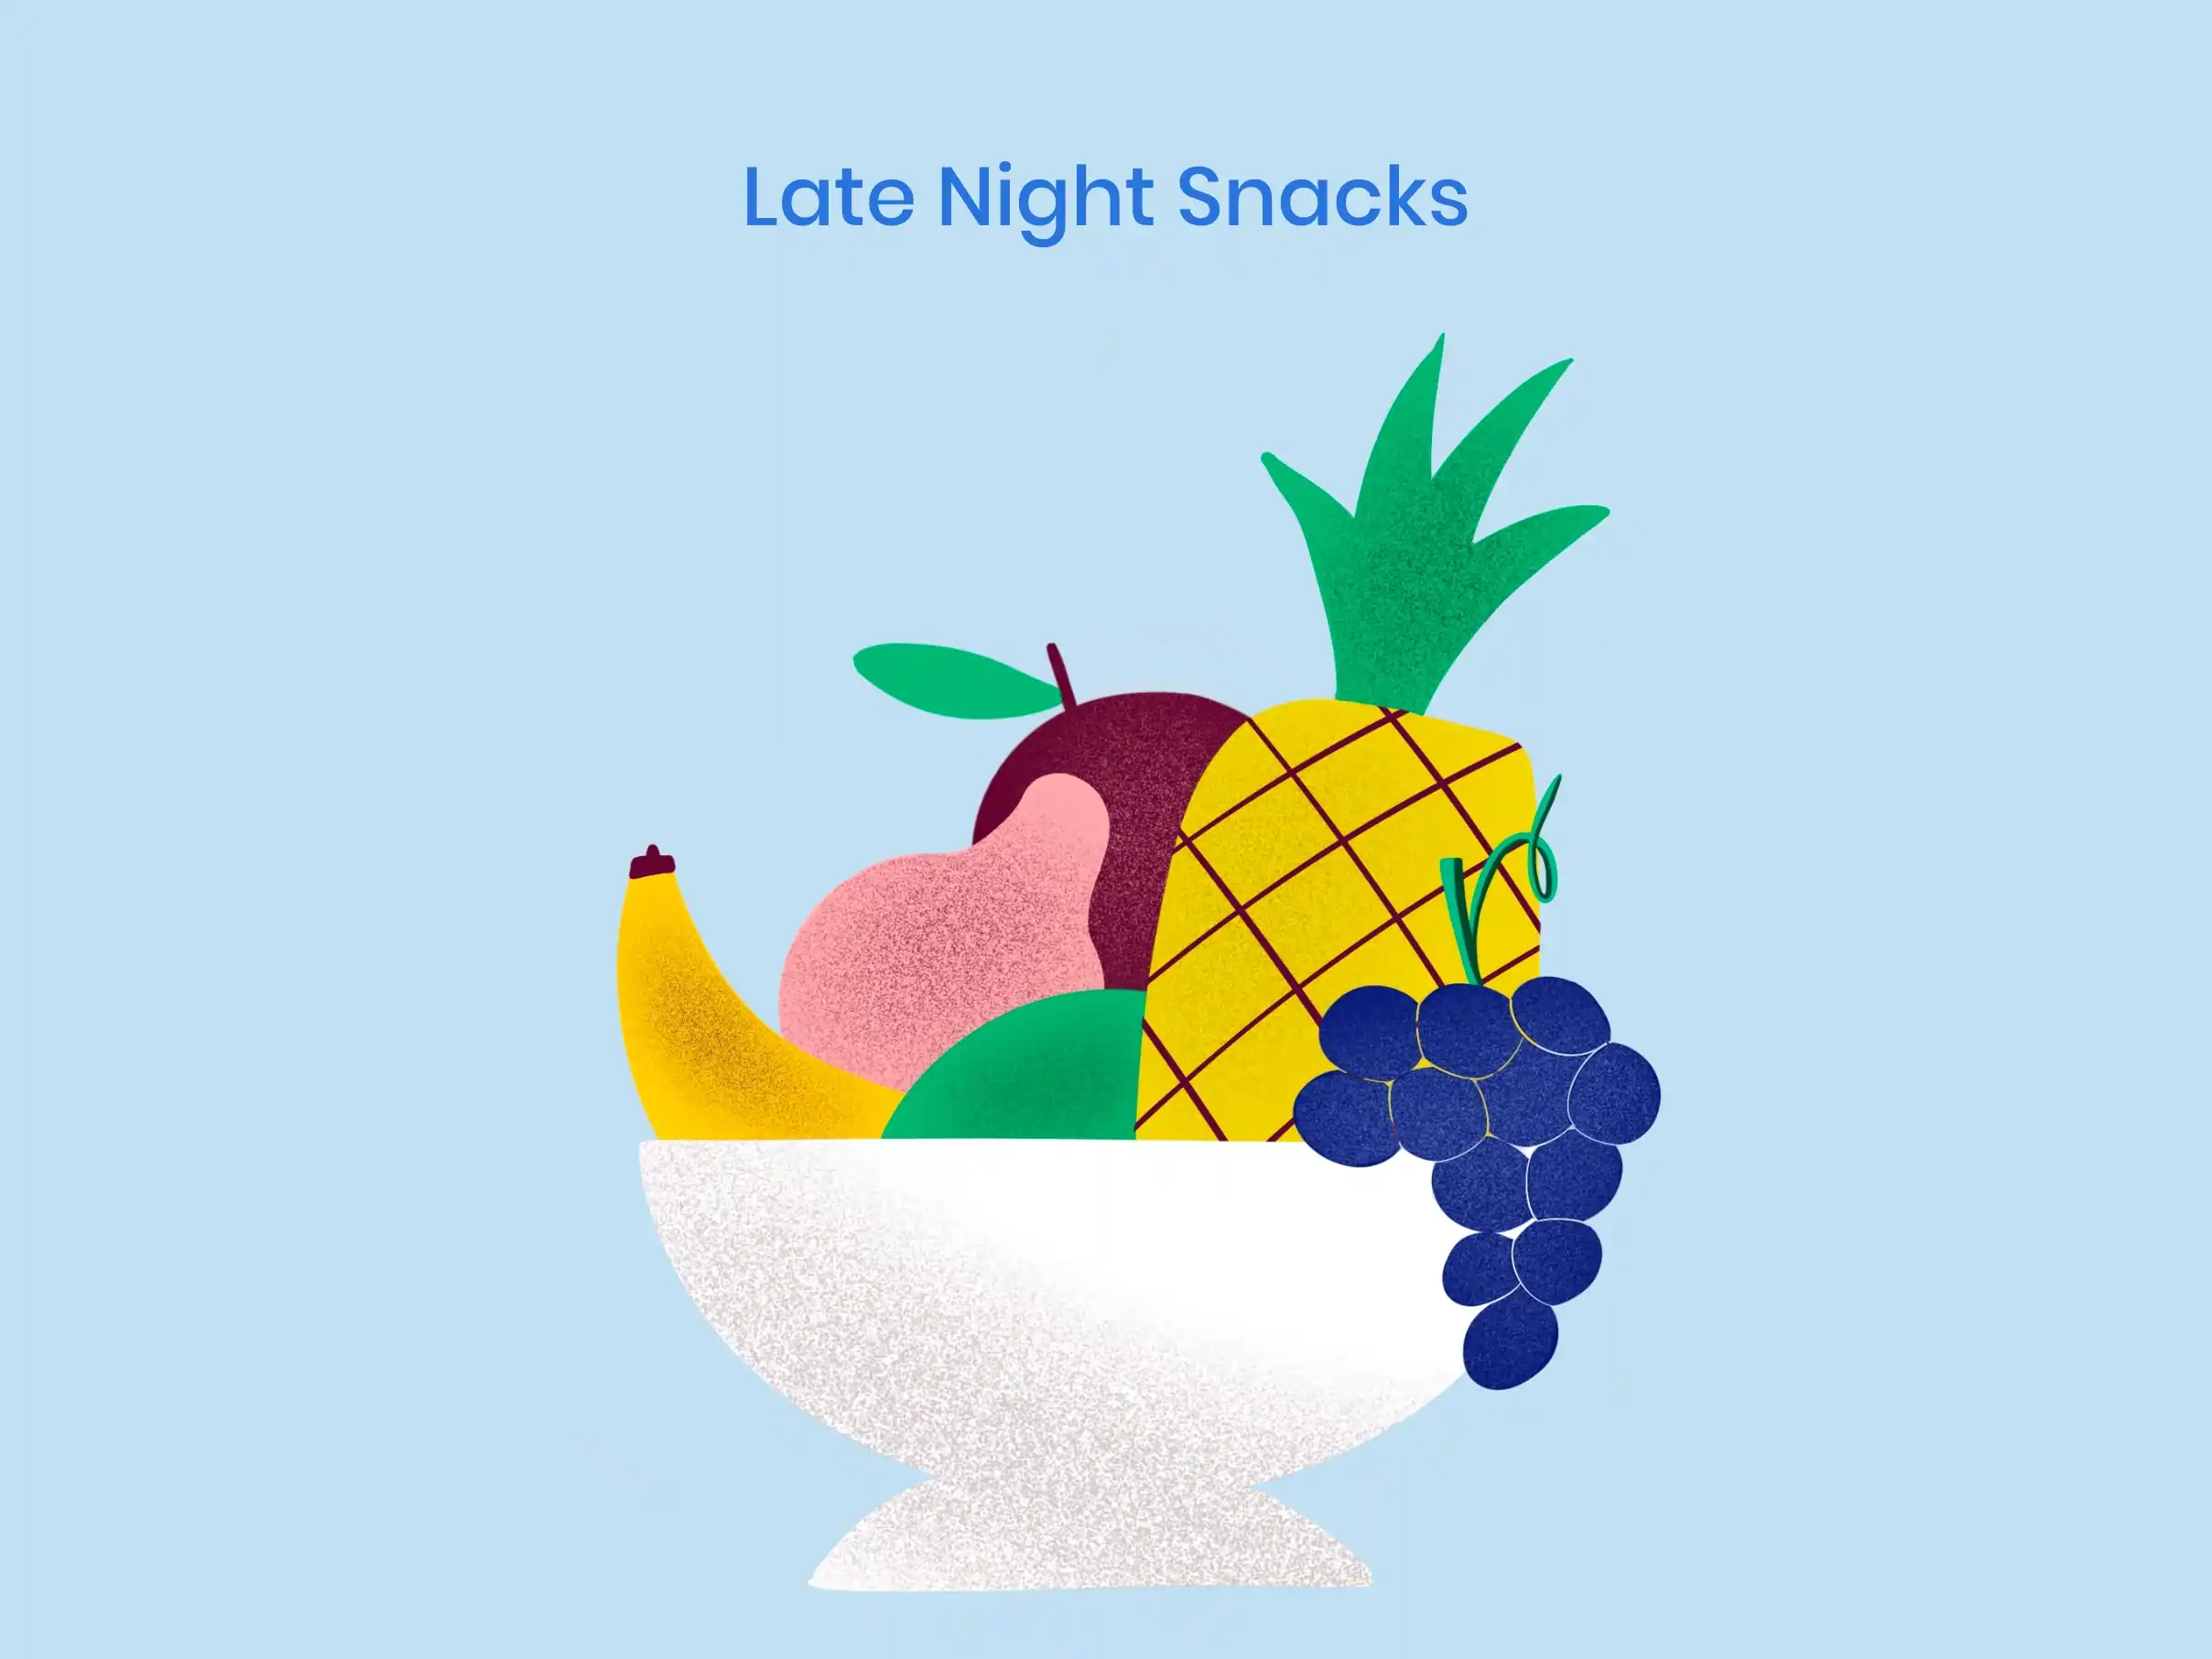 How To Curb Those Late Night Snack Cravings